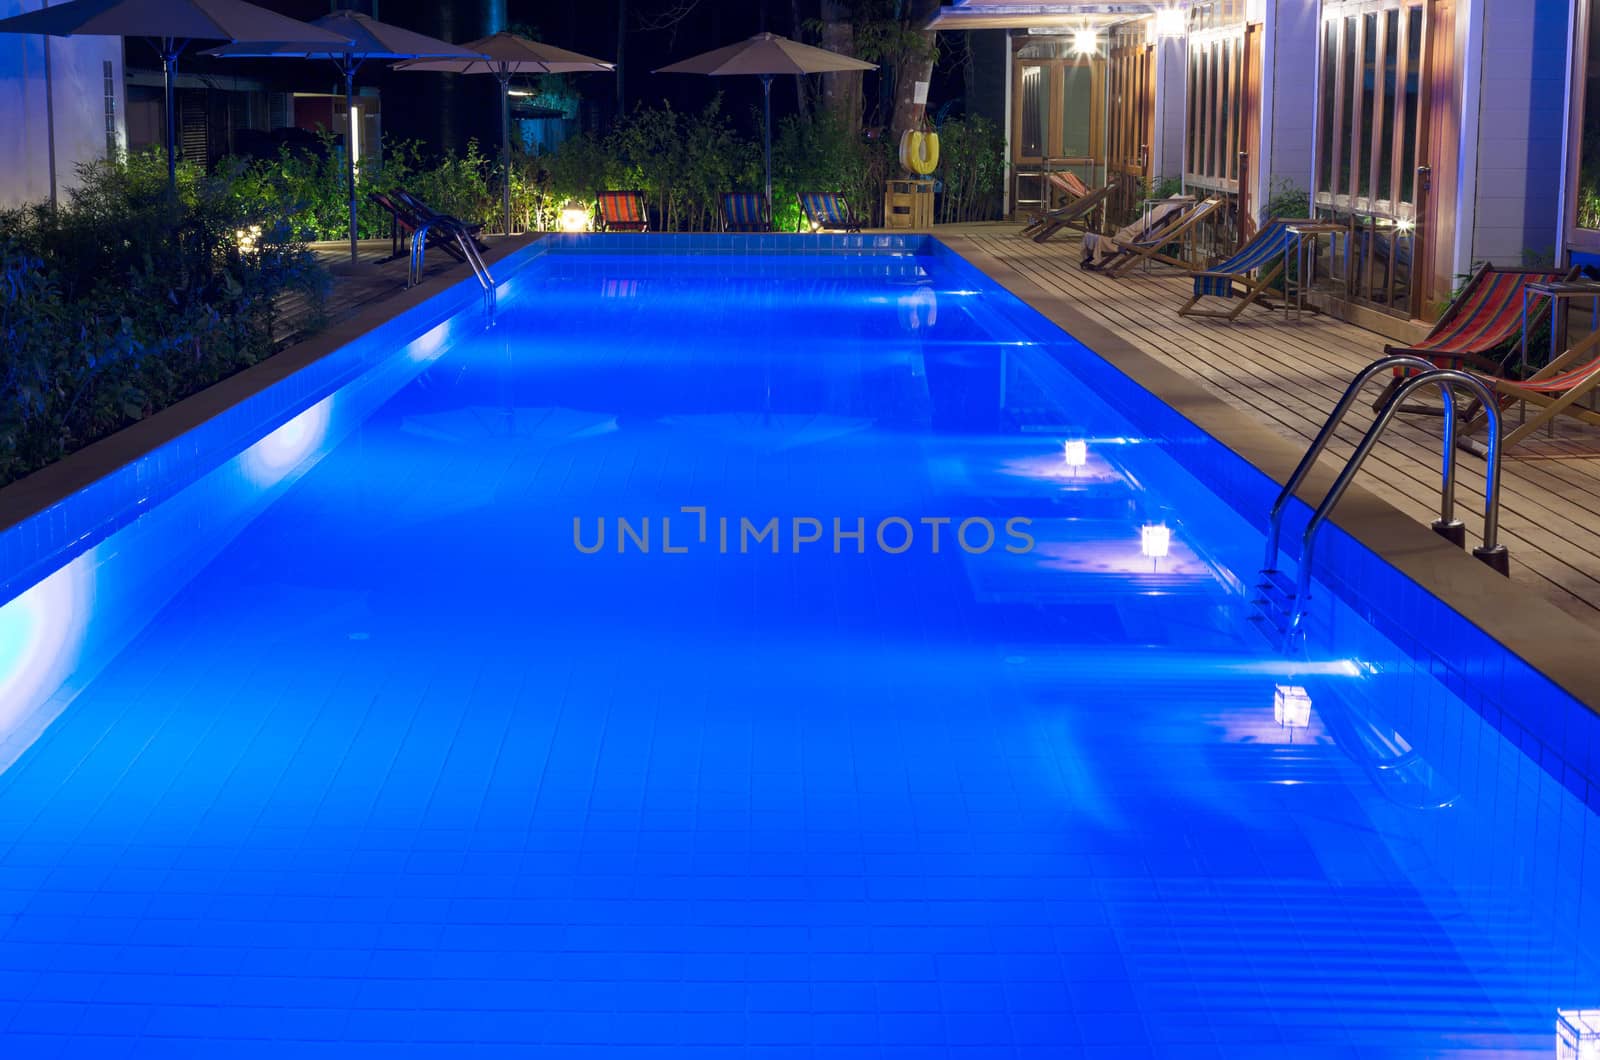 pretty swimming pool in night at a local resort.